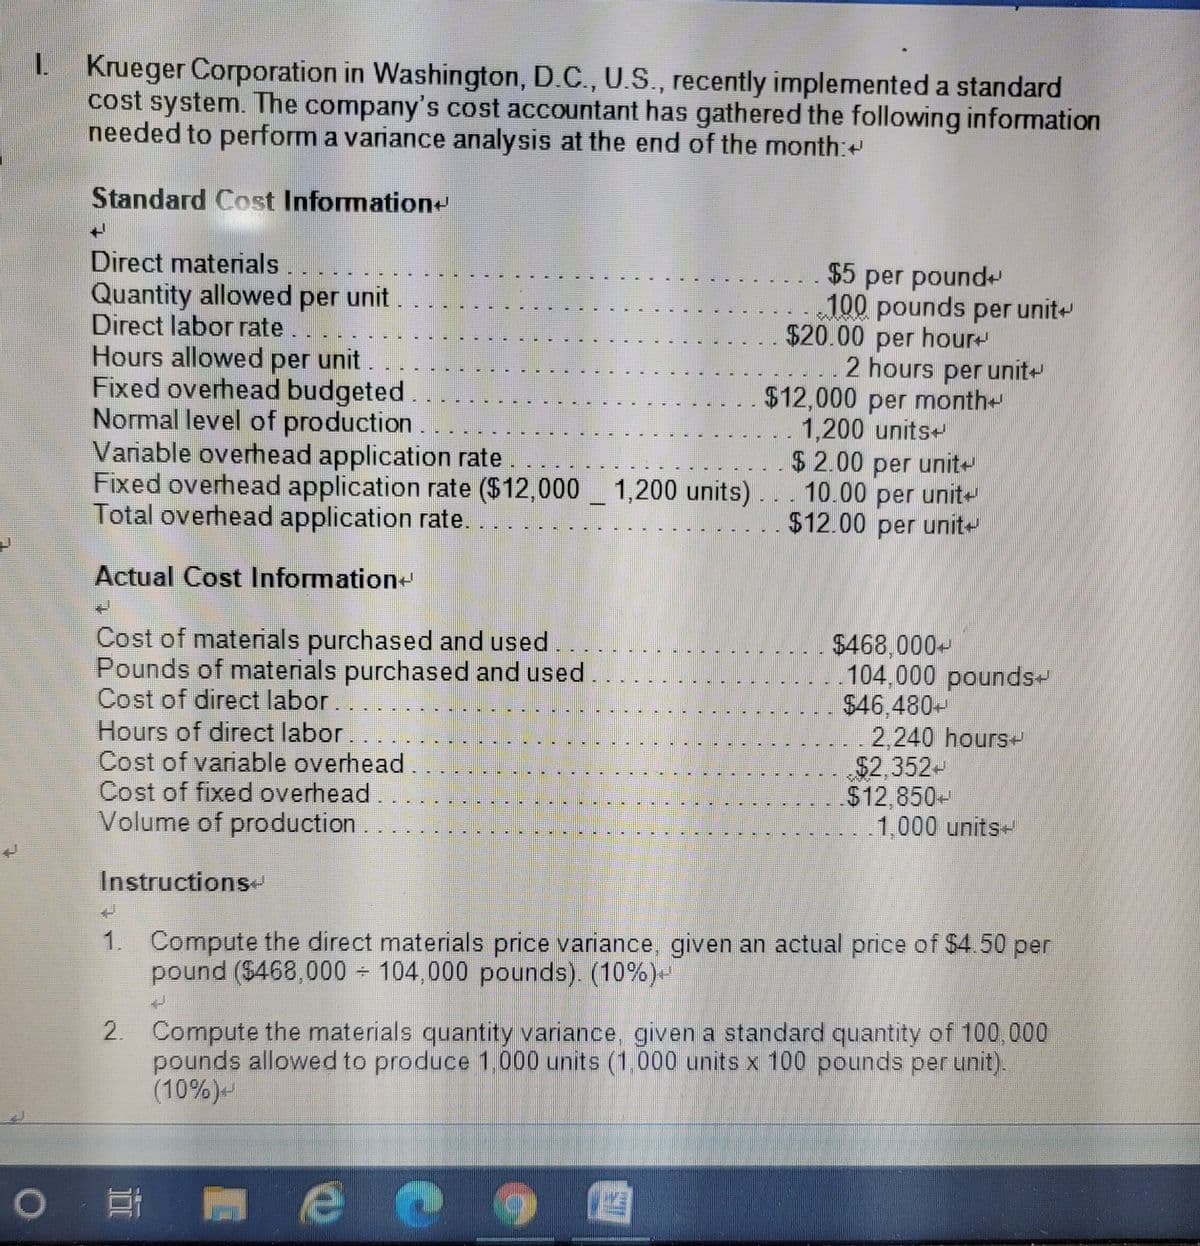 Krueger Corporation in Washington, D.C., U.S., recently implemented a standard
cost system. The company's cost accountant has gathered the following information
needed to perform a variance analysis at the end of the month:
Standard Cost Information+
Direct materials
Quantity allowed per unit
Direct labor rate..
Hours allowed per unit.
Fixed overhead budgeted
Normal level of production.
Variable overhead application rate
Fixed overhead application rate ($12,000 _ 1,200 units)... 10.00 per unit-
Total overhead application rate.
$5 per pound
100 pounds per unit
$20.00 per hour
..2 hours per unit-
$12,000 per month
1,200 units+
$2.00 per unit
$12.00 per unit
Actual Cost Information+
Cost of materials purchased and used.
Pounds of materials purchased and used
Cost of direct labor.
Hours of direct labor
Cost of variable overhead
Cost of fixed overhead.
Volume of production.
$468,000-
..104,000 pounds-
$46,480-
..2,240 hours-
$2,352-
$12,850-
1,000 units-
Instructions
Compute the direct materials price variance, given an actual price of $4.50 per
pound ($468,000 104,000 pounds). (10%)-
2. Compute the materials quantity variance, given a standard quantity of 100,000
pounds allowed to produce 1,000 units (1,000 units x 100 pounds per unit).
(10%)
